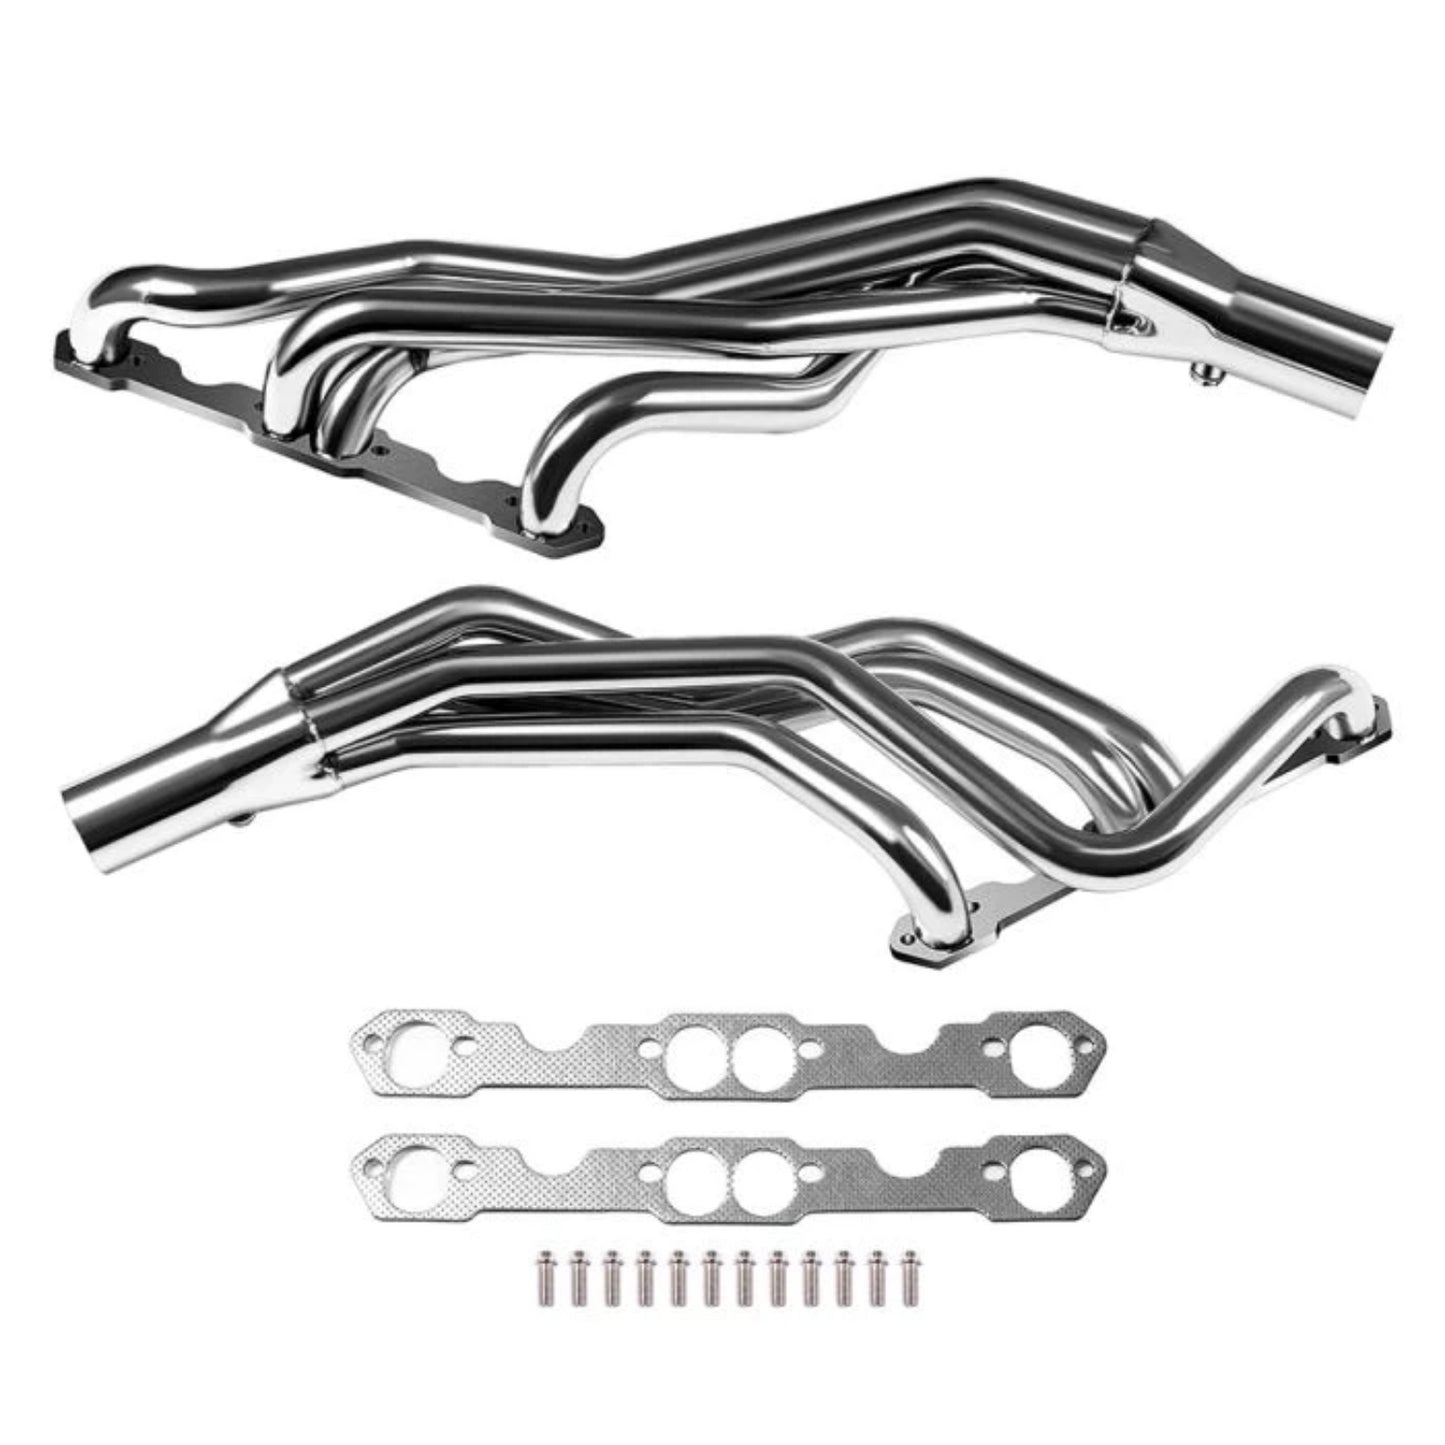 Stainless Headers Exhaust Manifold For 1993-1997 Chevy Camaro/Firebird 5.7L LT1 V8